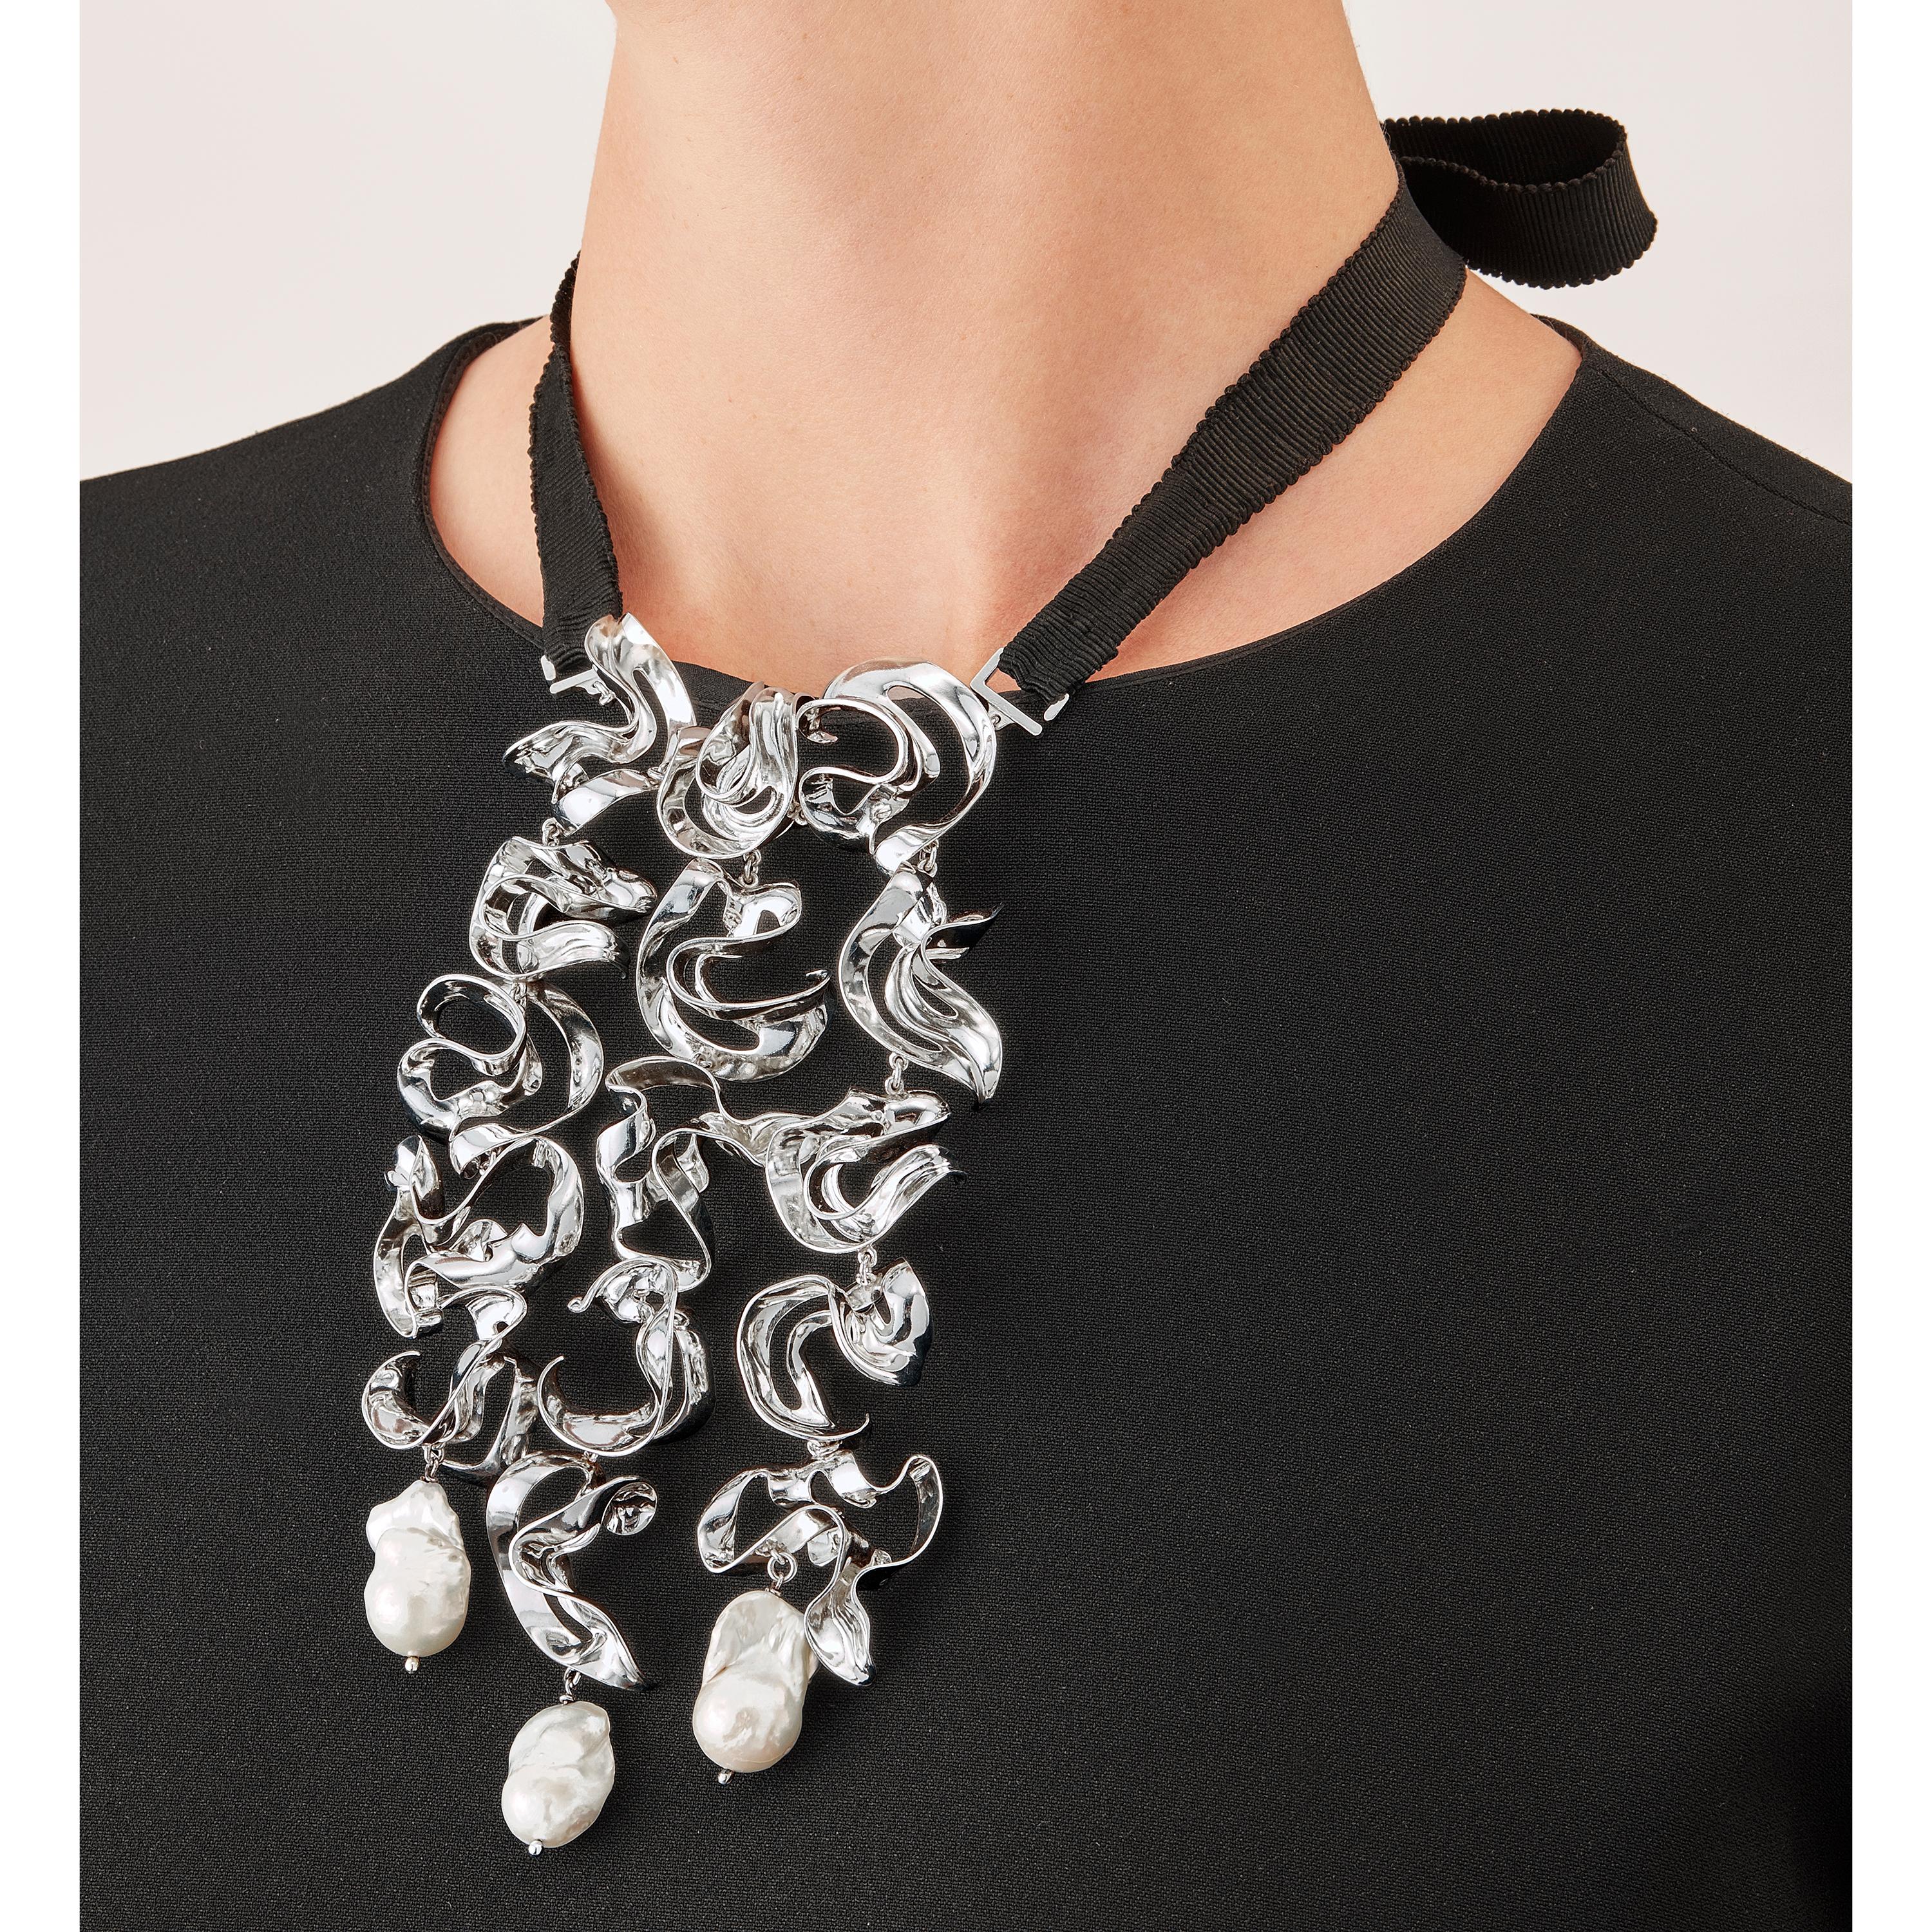 With their delicate, curved, free-form surfaces, the little sculpture elements of this contemporary necklace fold and unfold with harmony and grace like shell fragments or metalized leaves. Linked to each other to form a sterling silver ivy, these